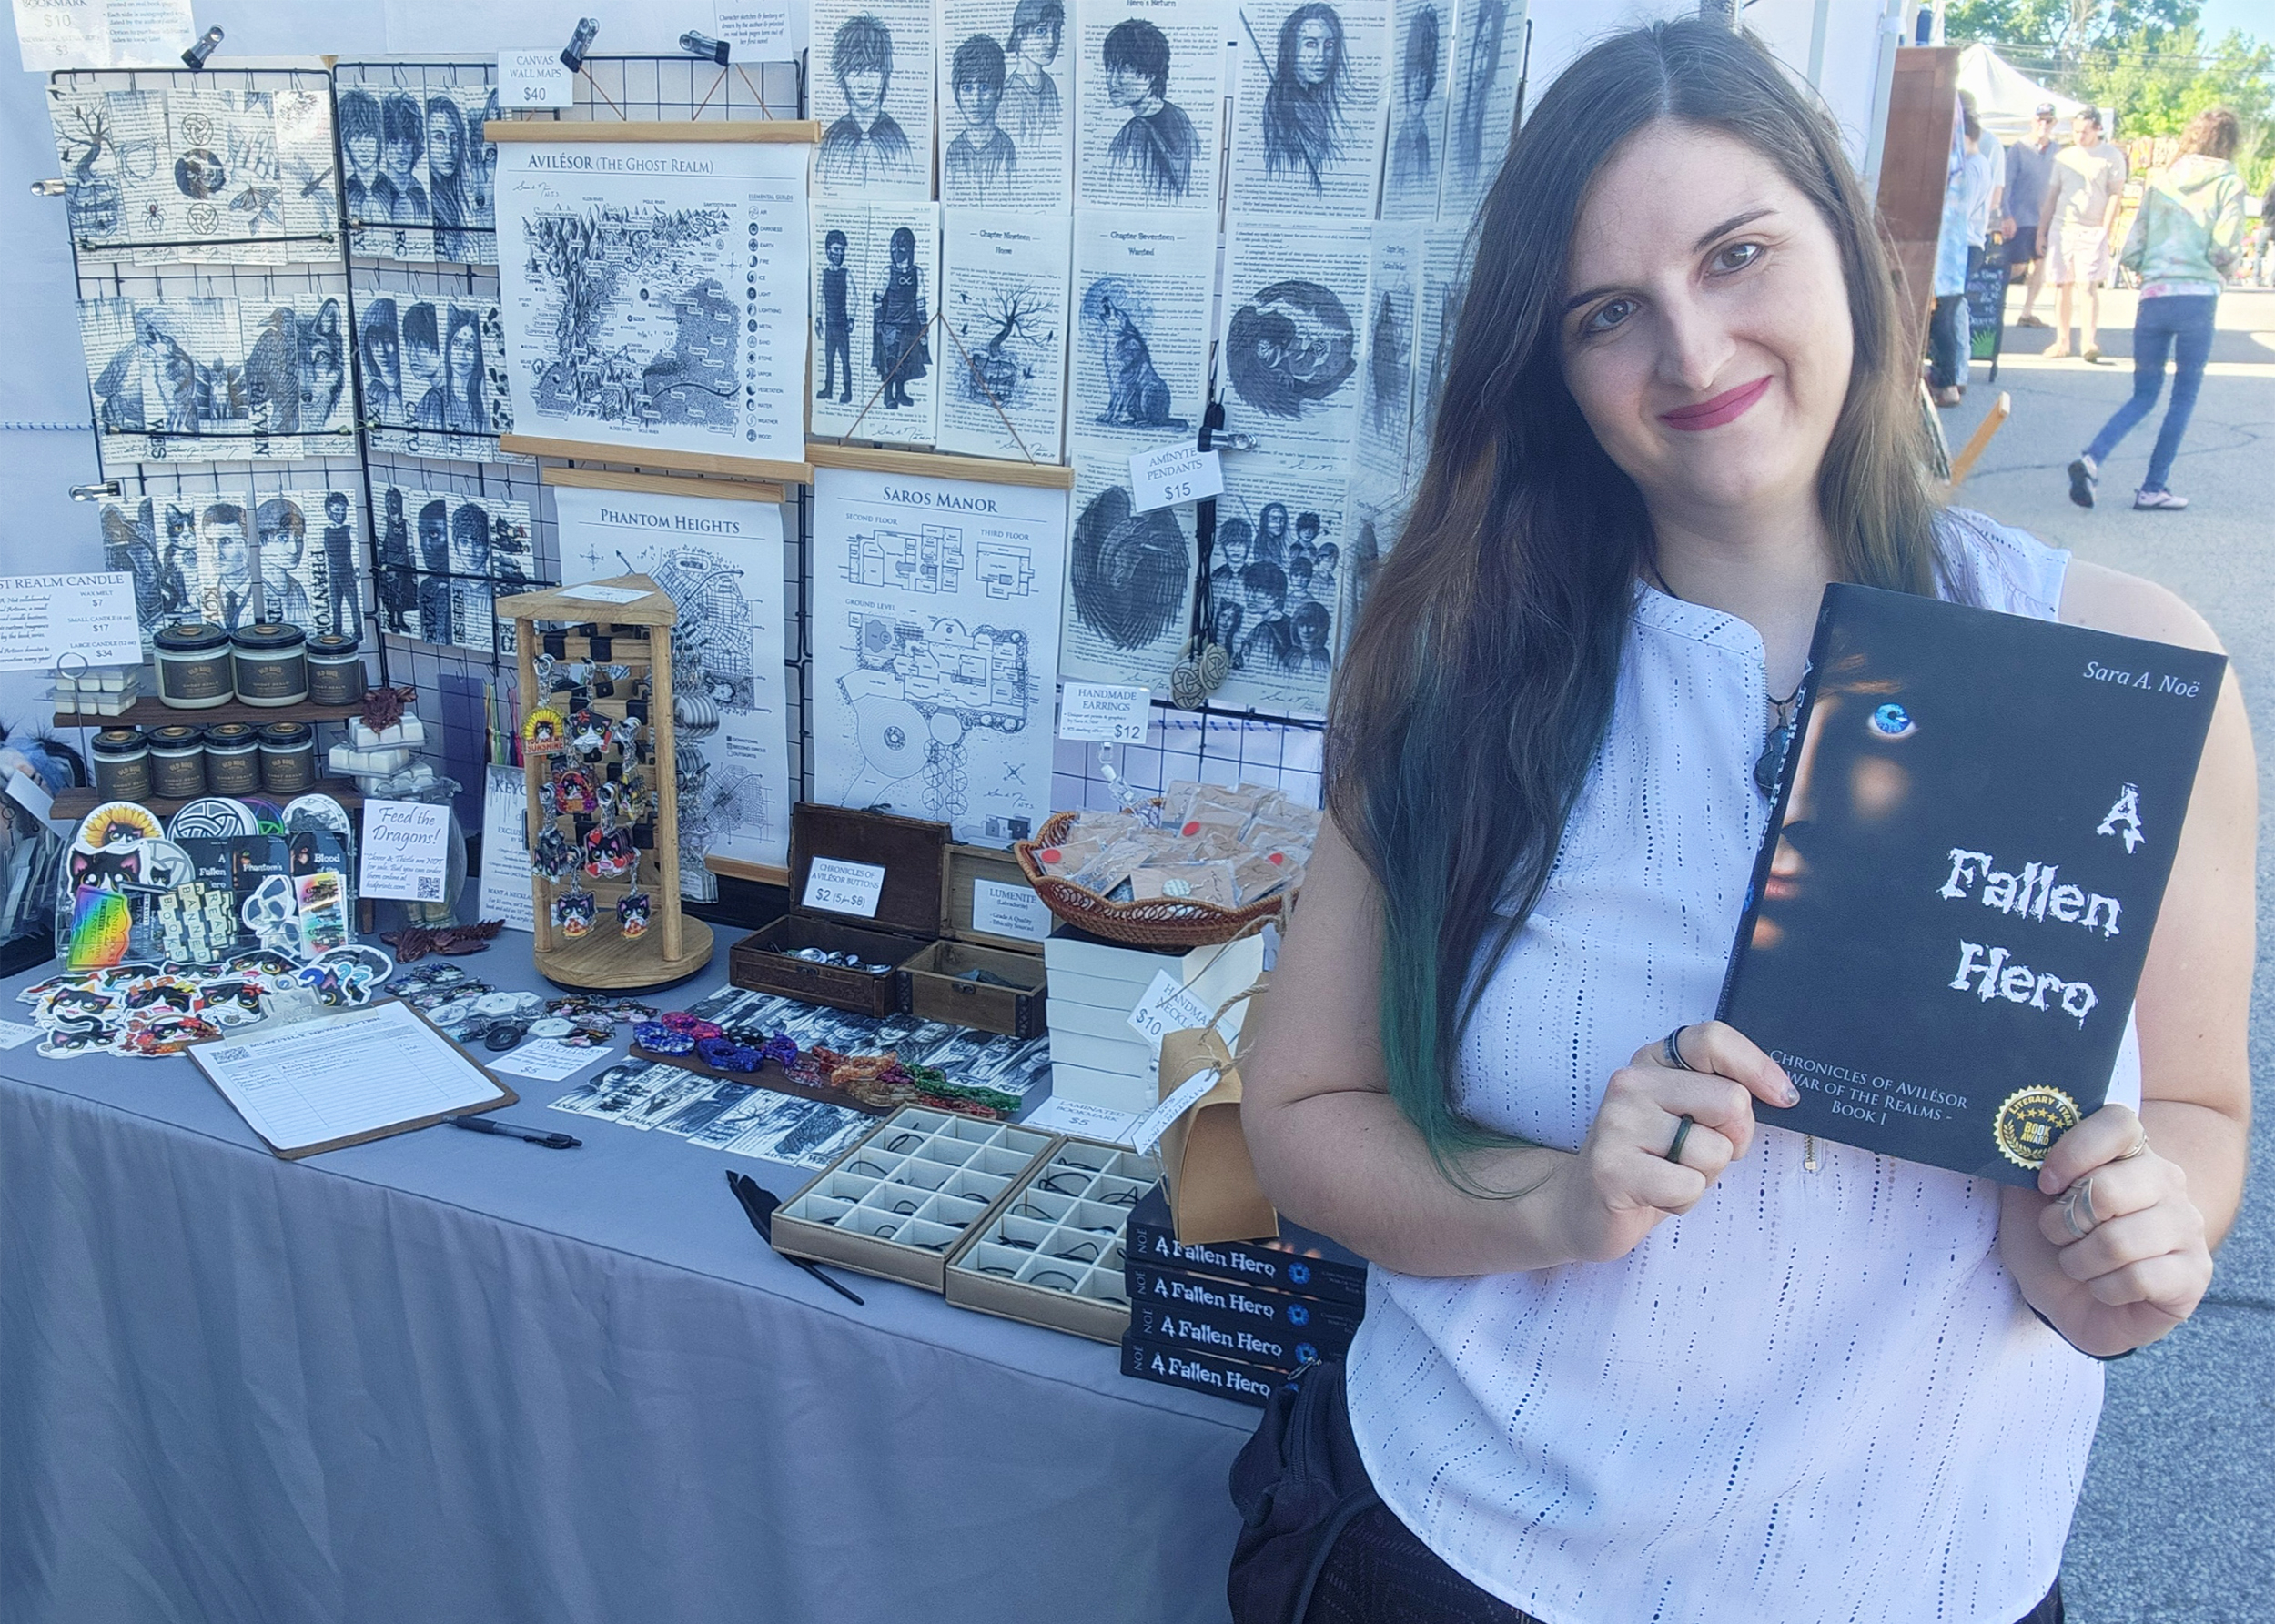 Author Sara A. Noe holding A Fallen Hero in front of her booth